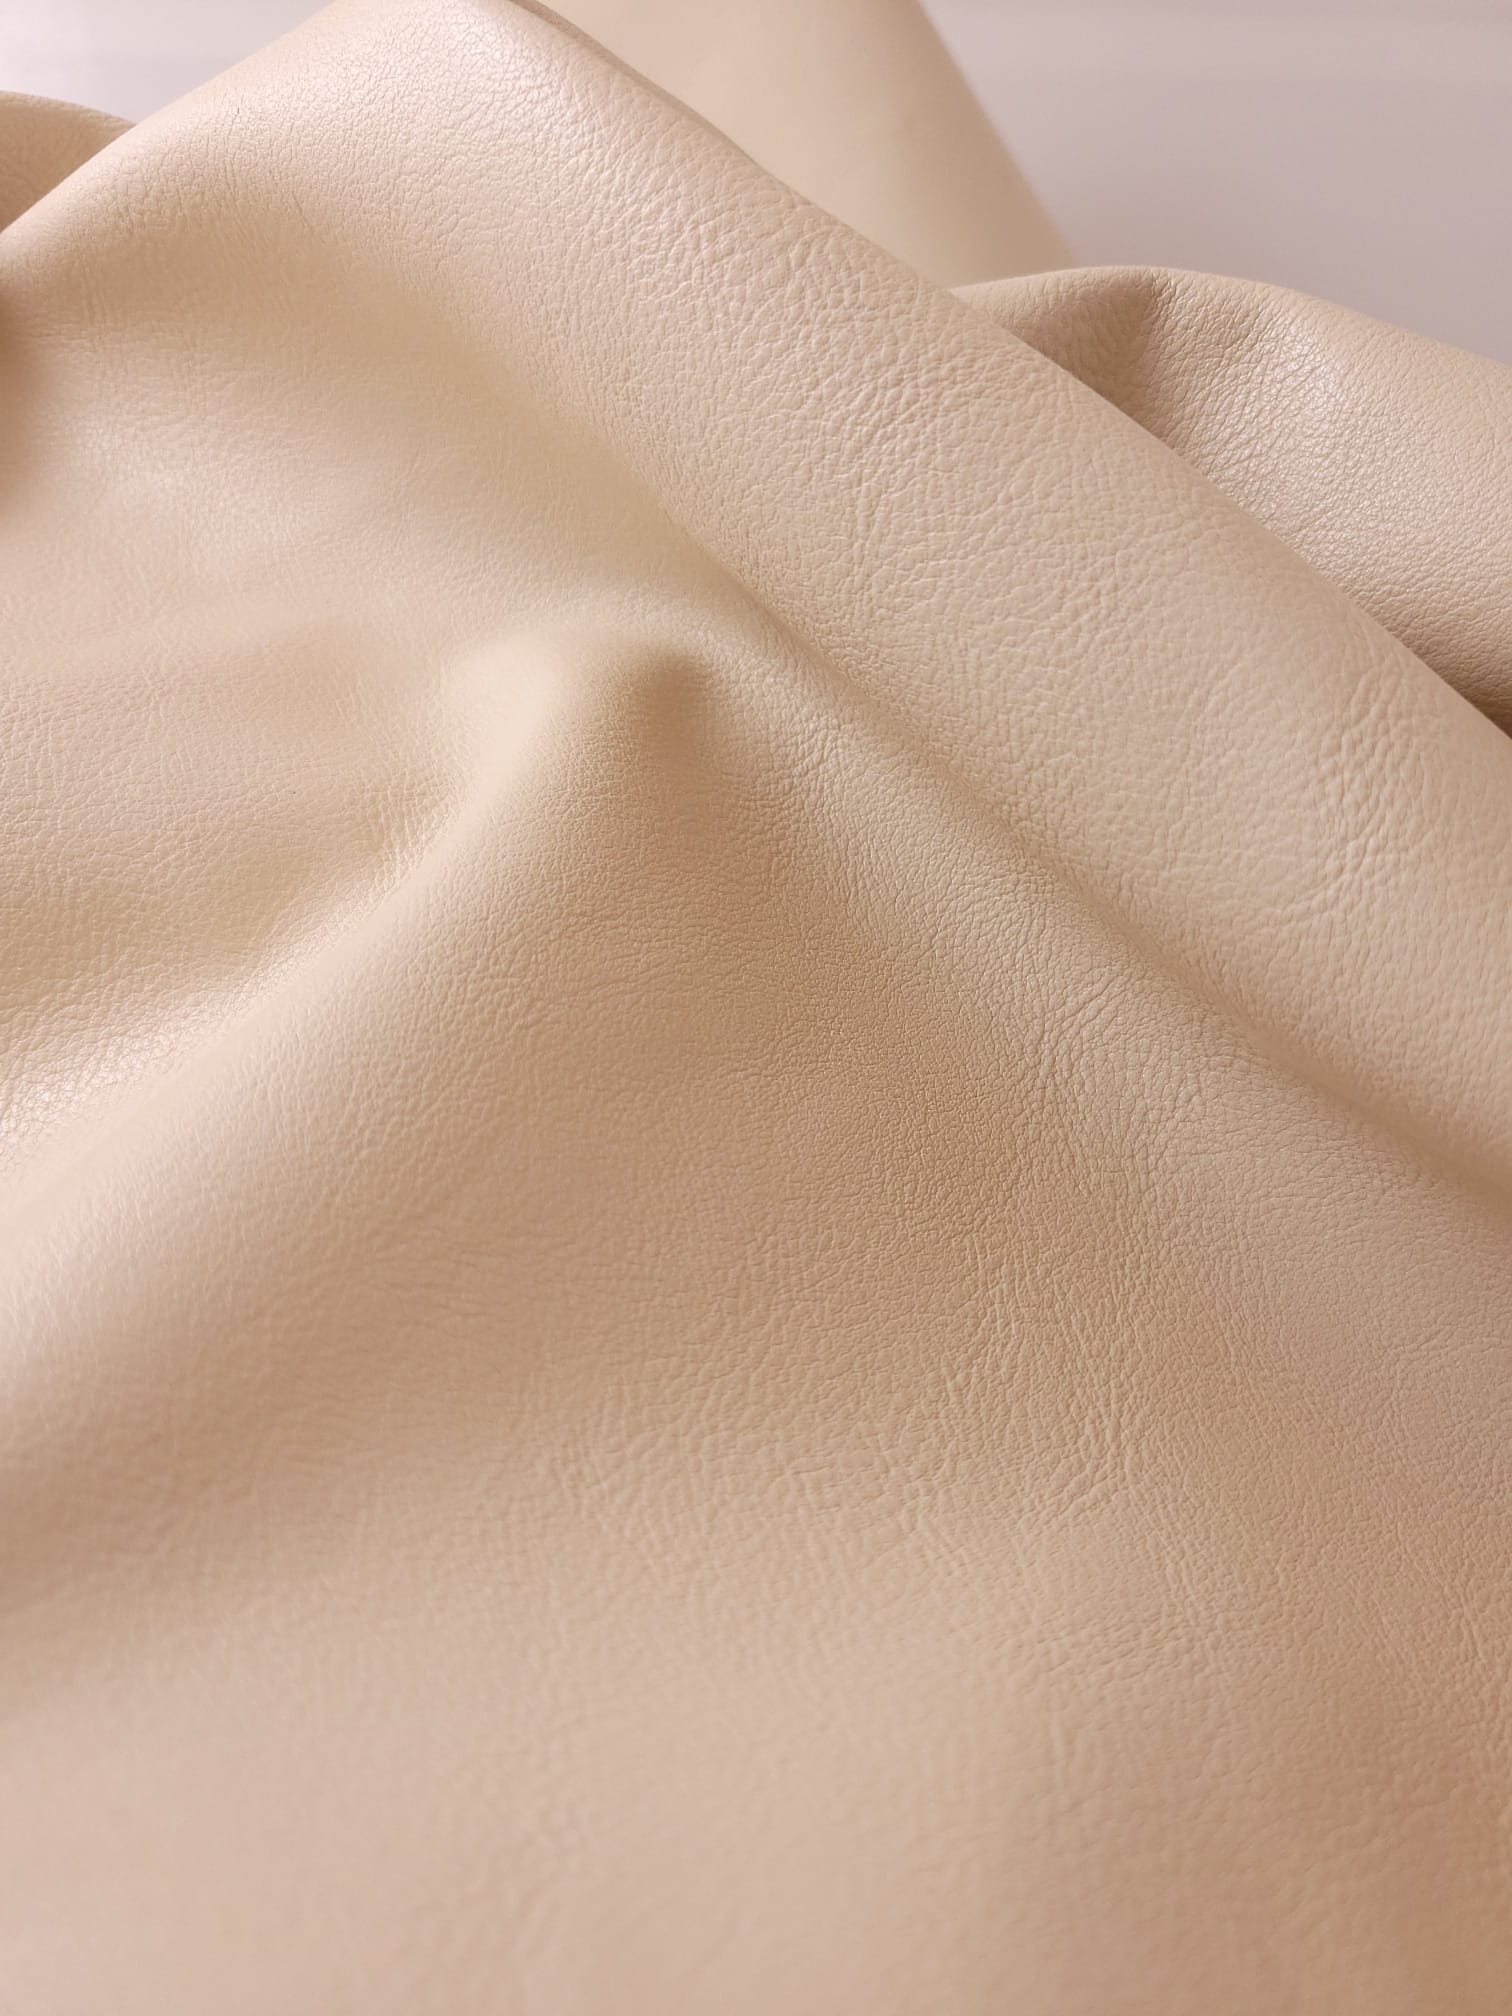  Faux vegan leather by the yard sheets distressed leather fabric for upholstery 30,000 Double Rubs vinyl sheets nappa leather crafts bookbinding books furniture fabrics uphilstery fuax material pu pleather faiux learher cruelty free nappa seat bone off white cream